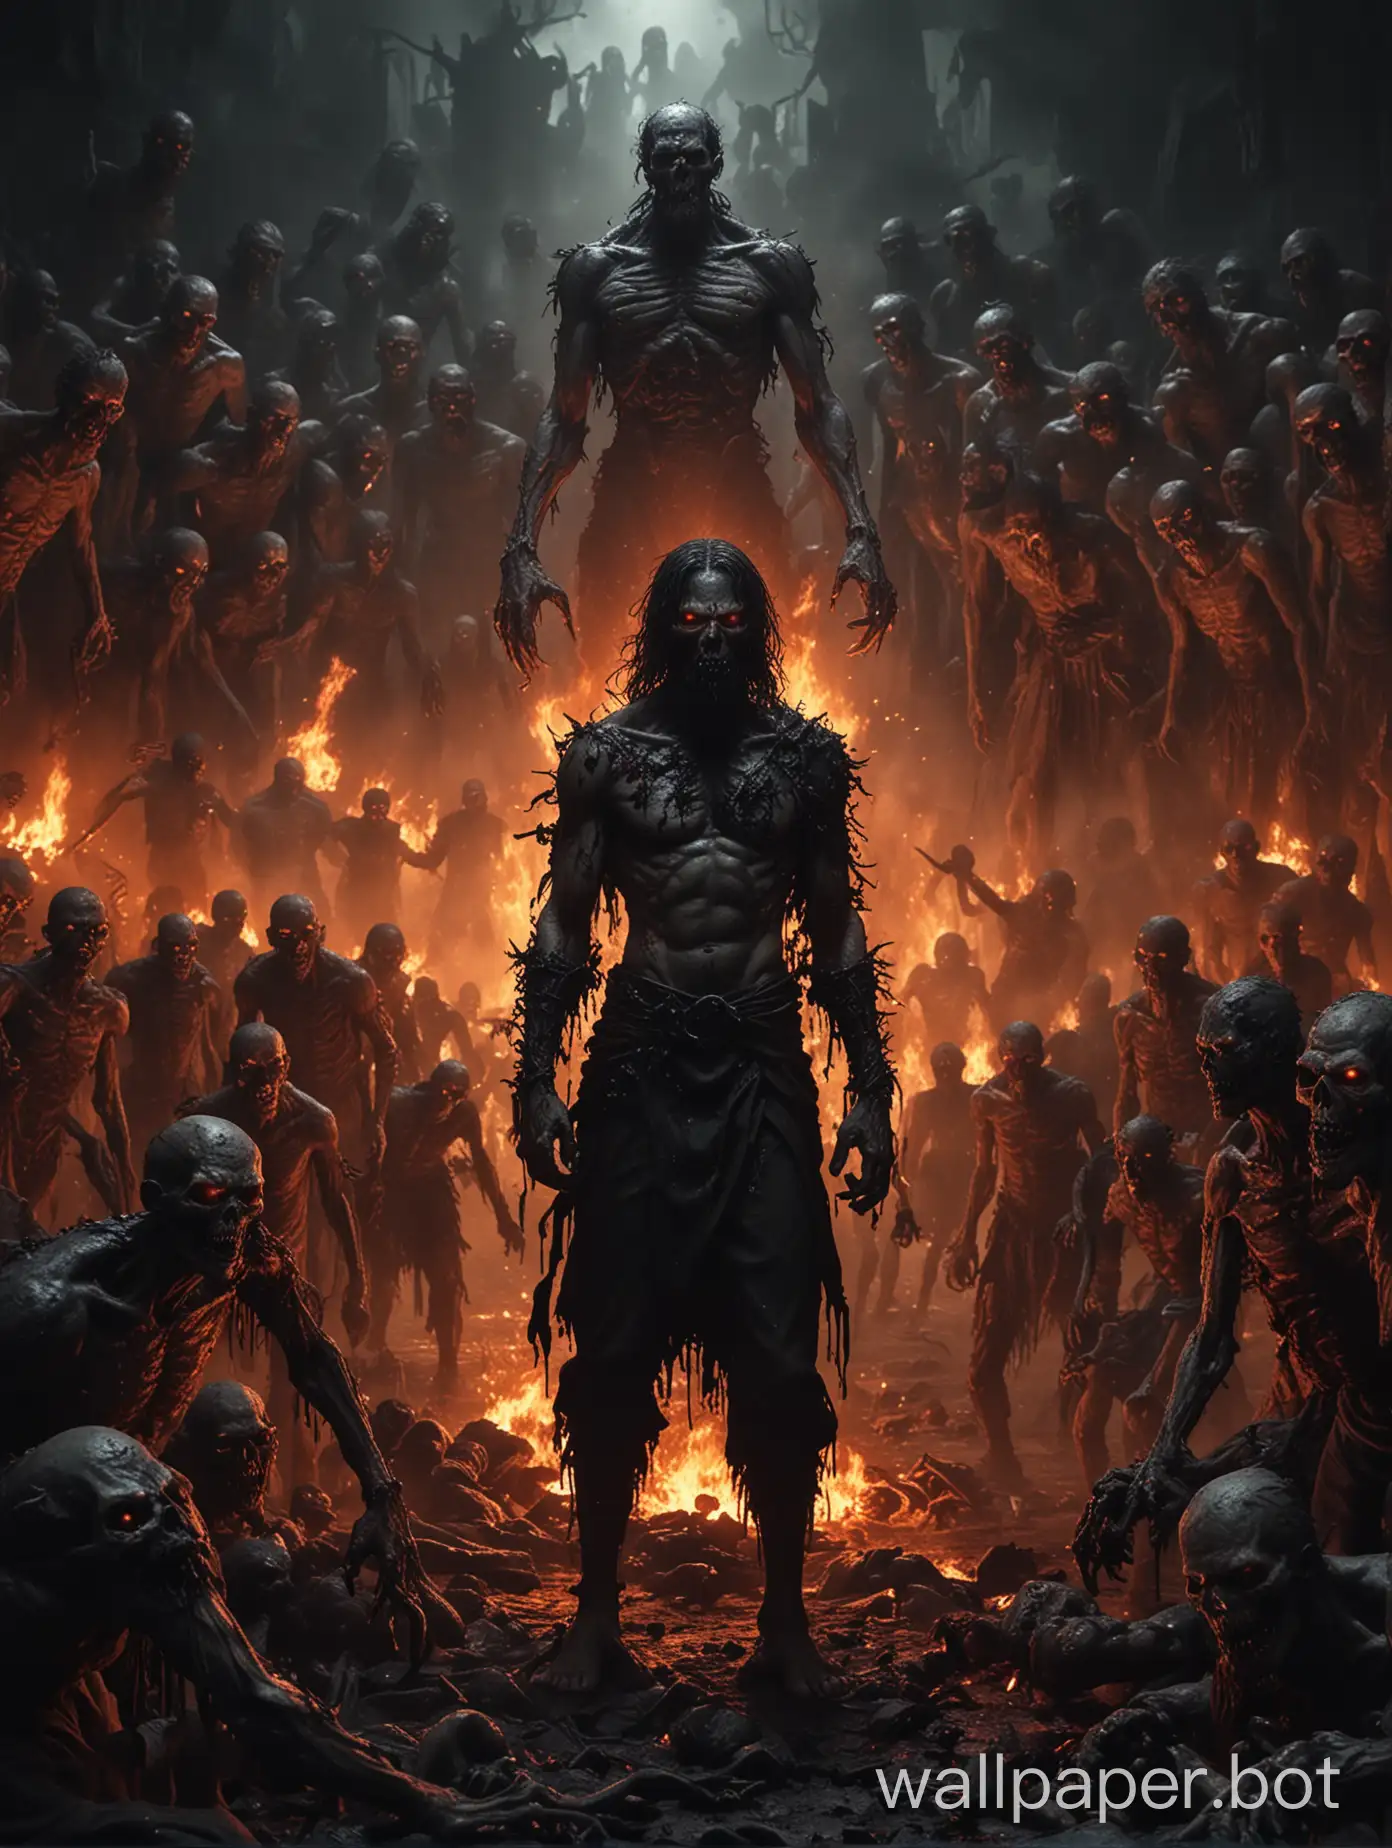 Hyperrealistic-Dark-Fantasy-Art-Standing-in-Hell-Among-Zombies-and-Ominous-Figures